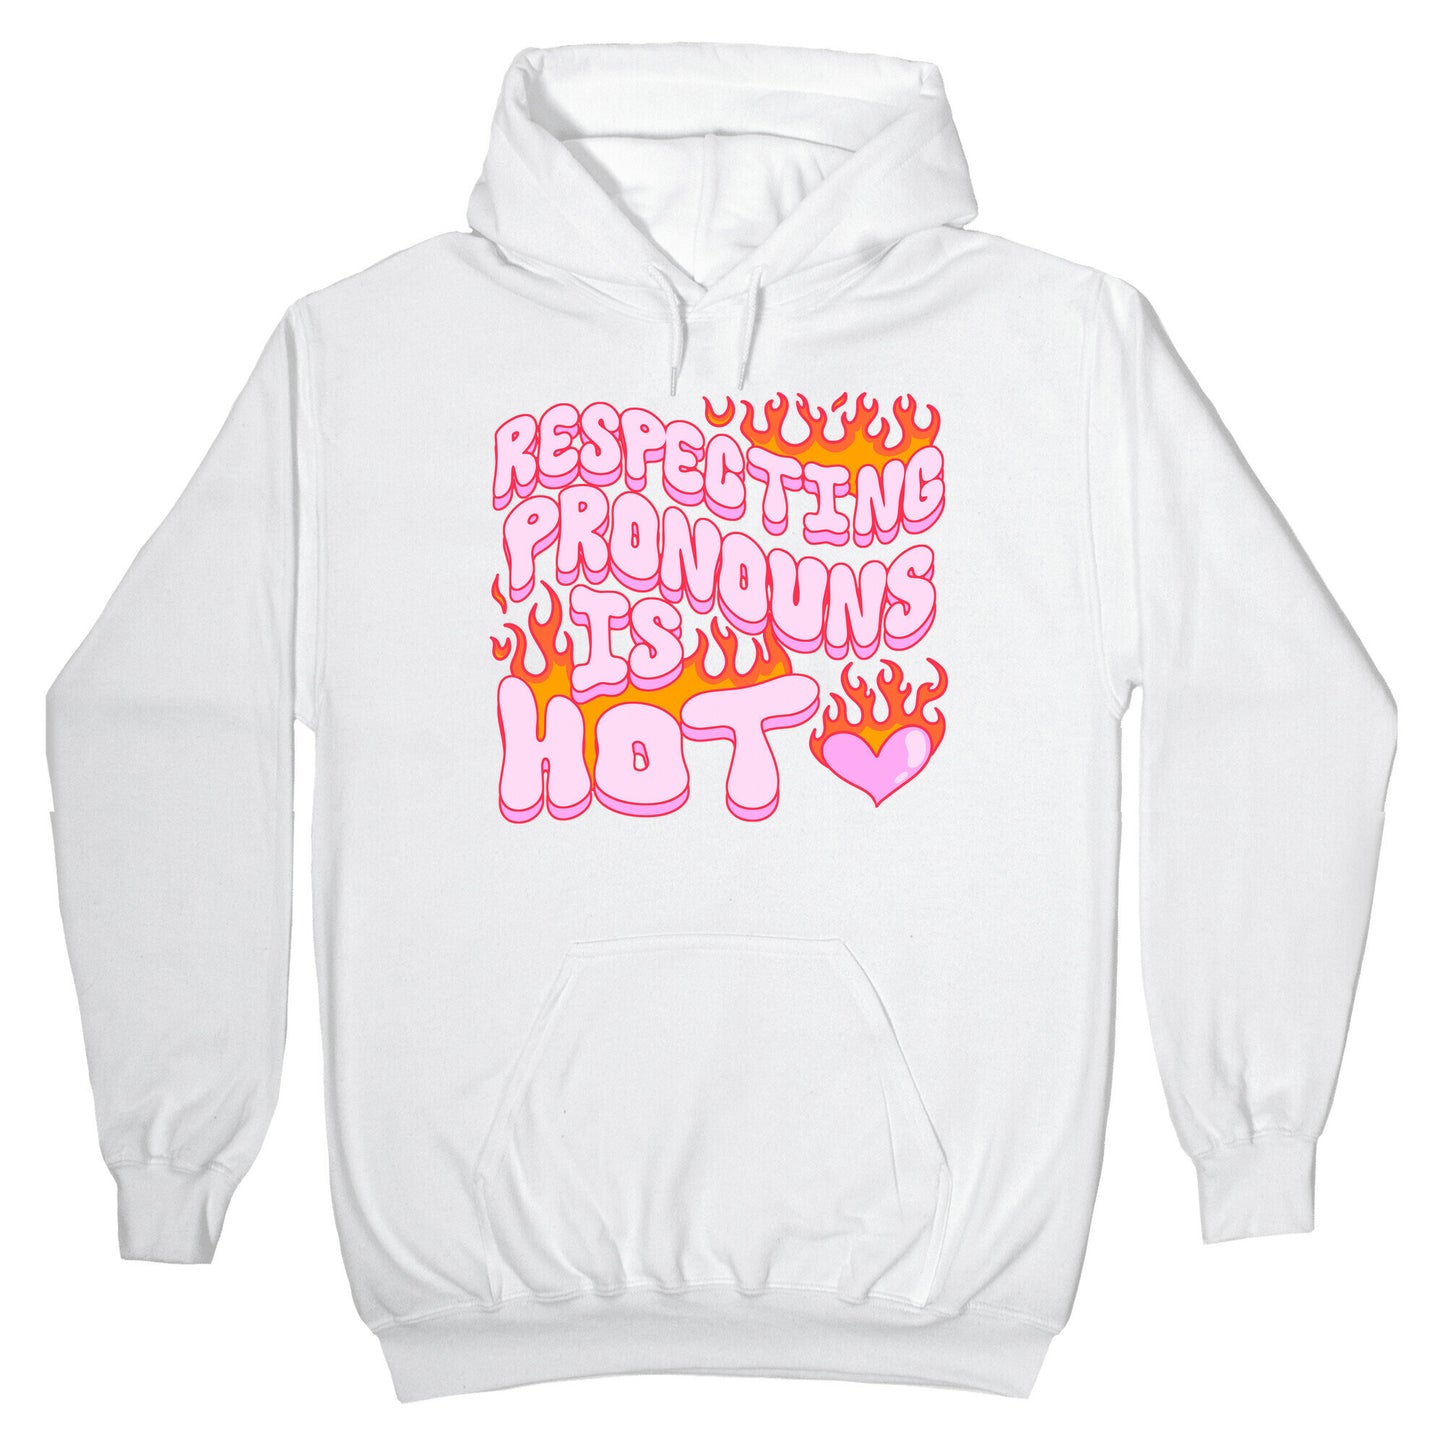 Respecting Pronouns Is Hot Hoodie